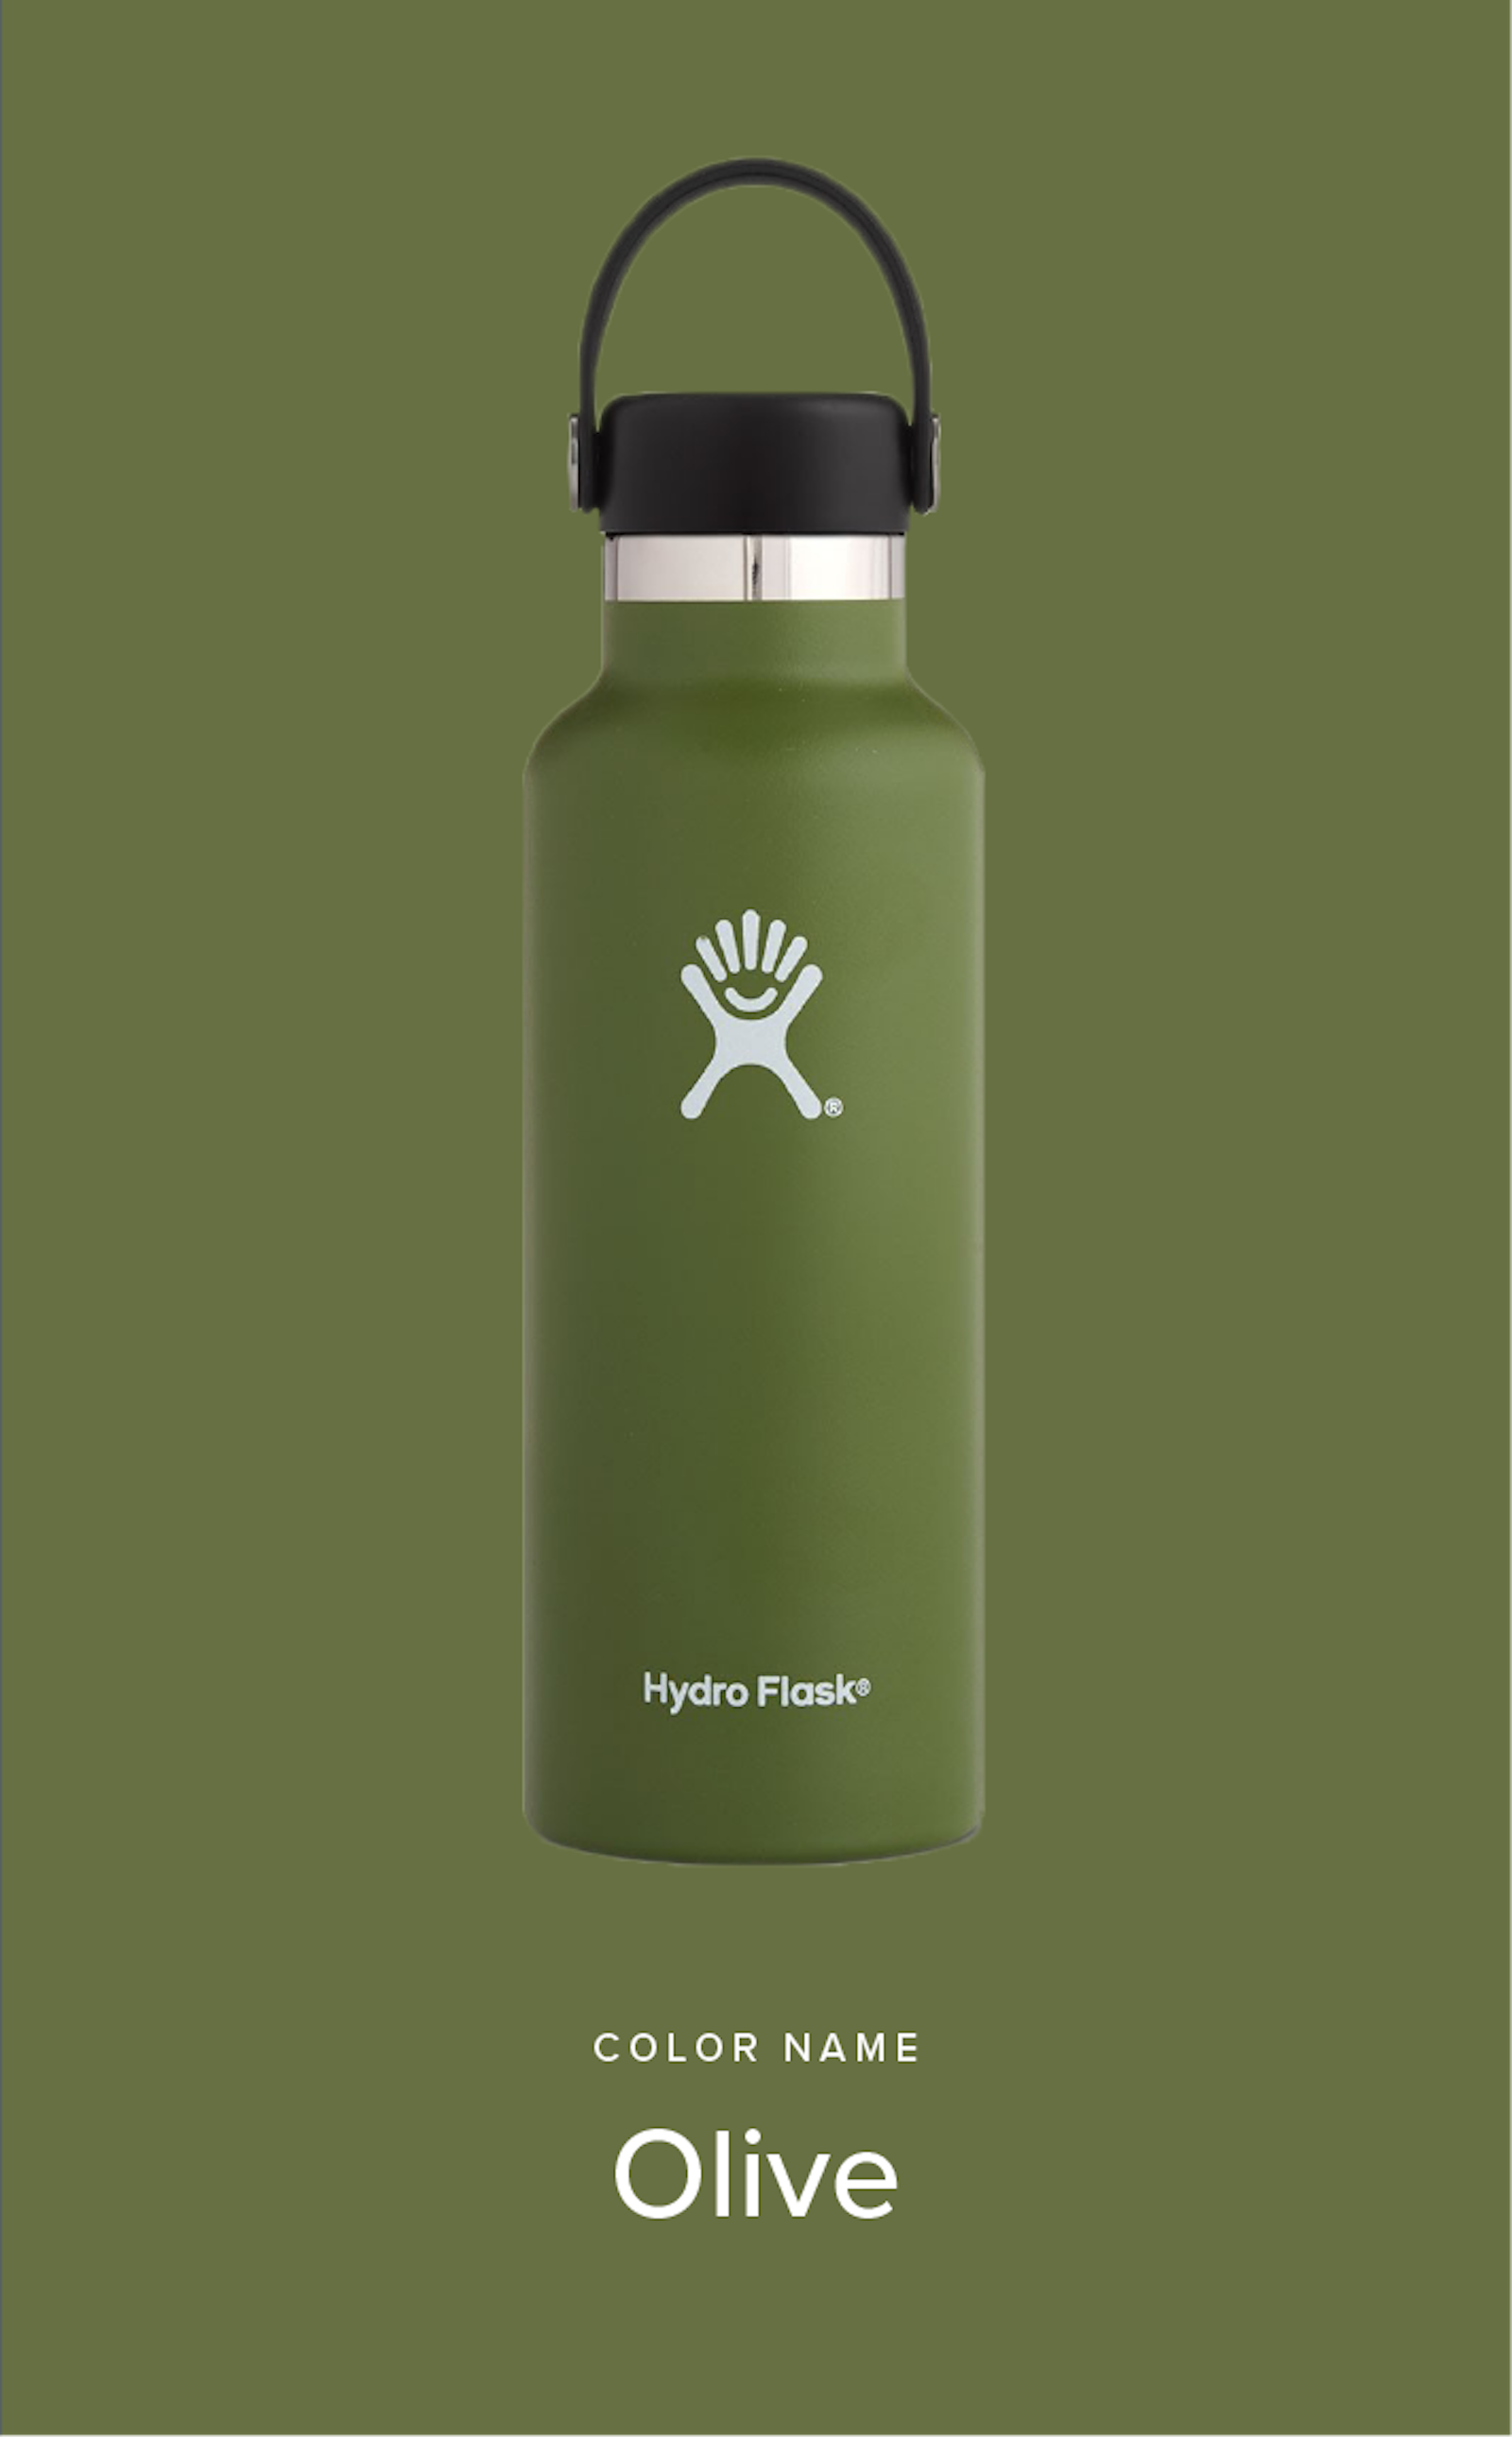 https://capsule-us.imgix.net/work/Hyidroflask-Olive.png?fit=clip&q=80&w=1600